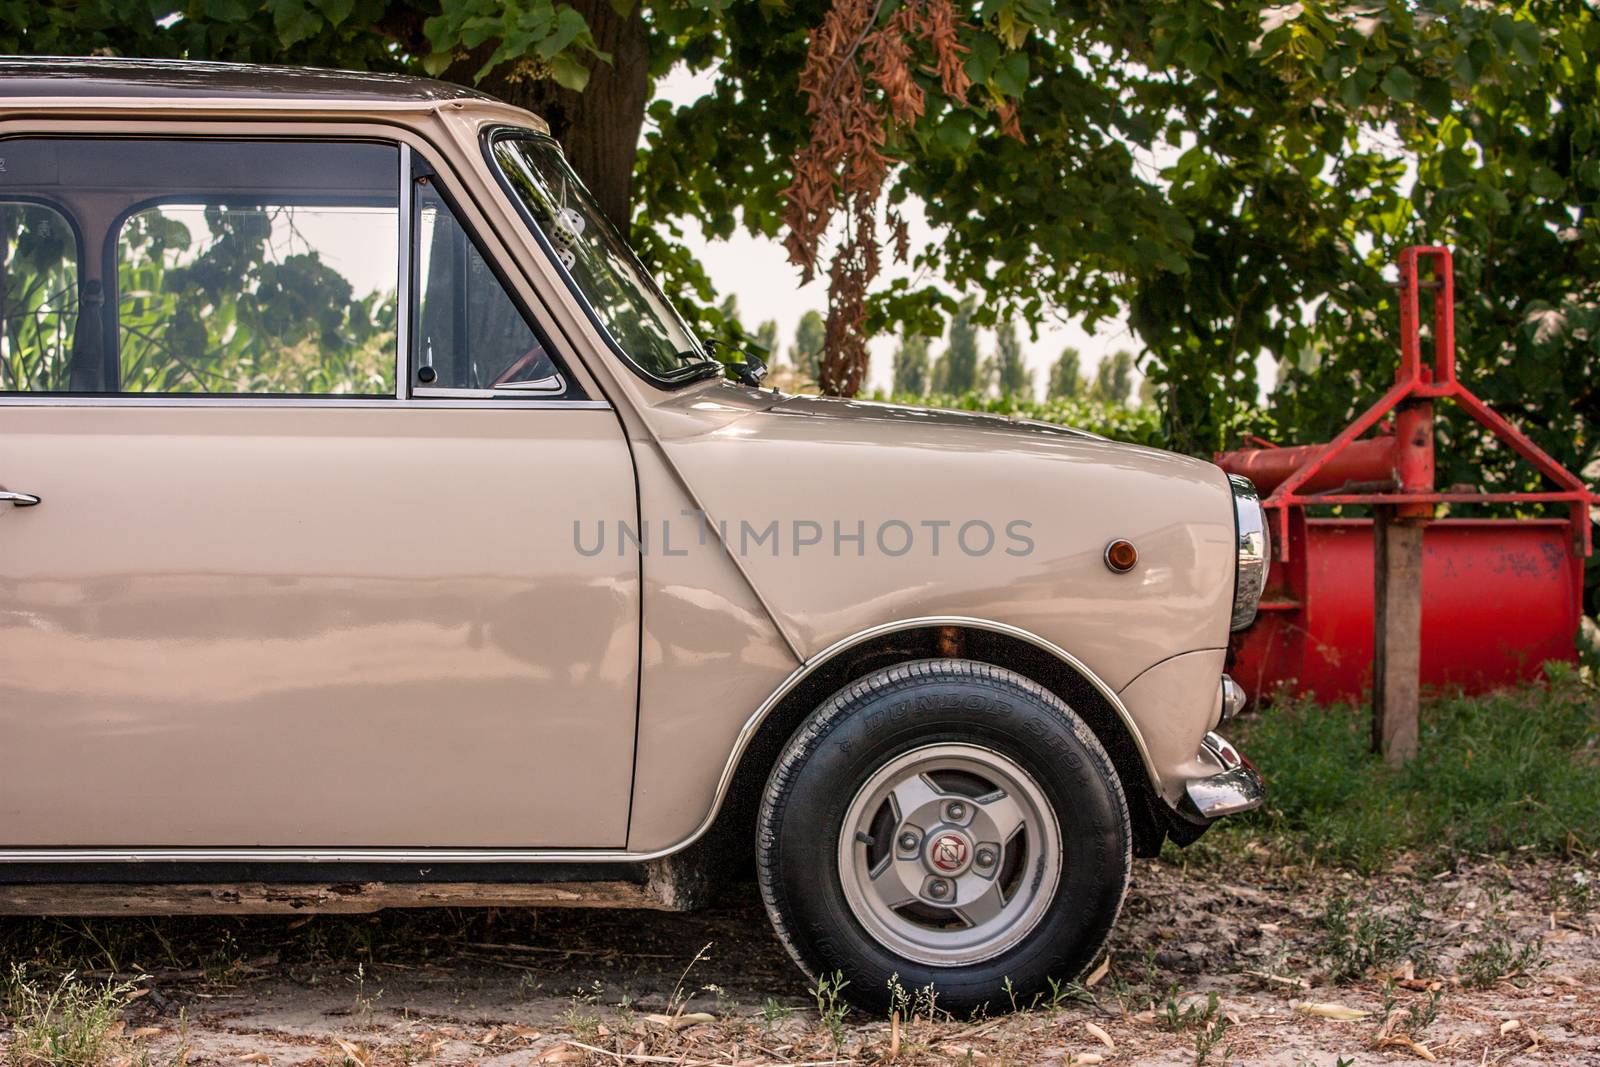 A Mini Minor: a small fully restored vintage subcompact car parked in the shade of some trees in a typical rural Italian scenery.